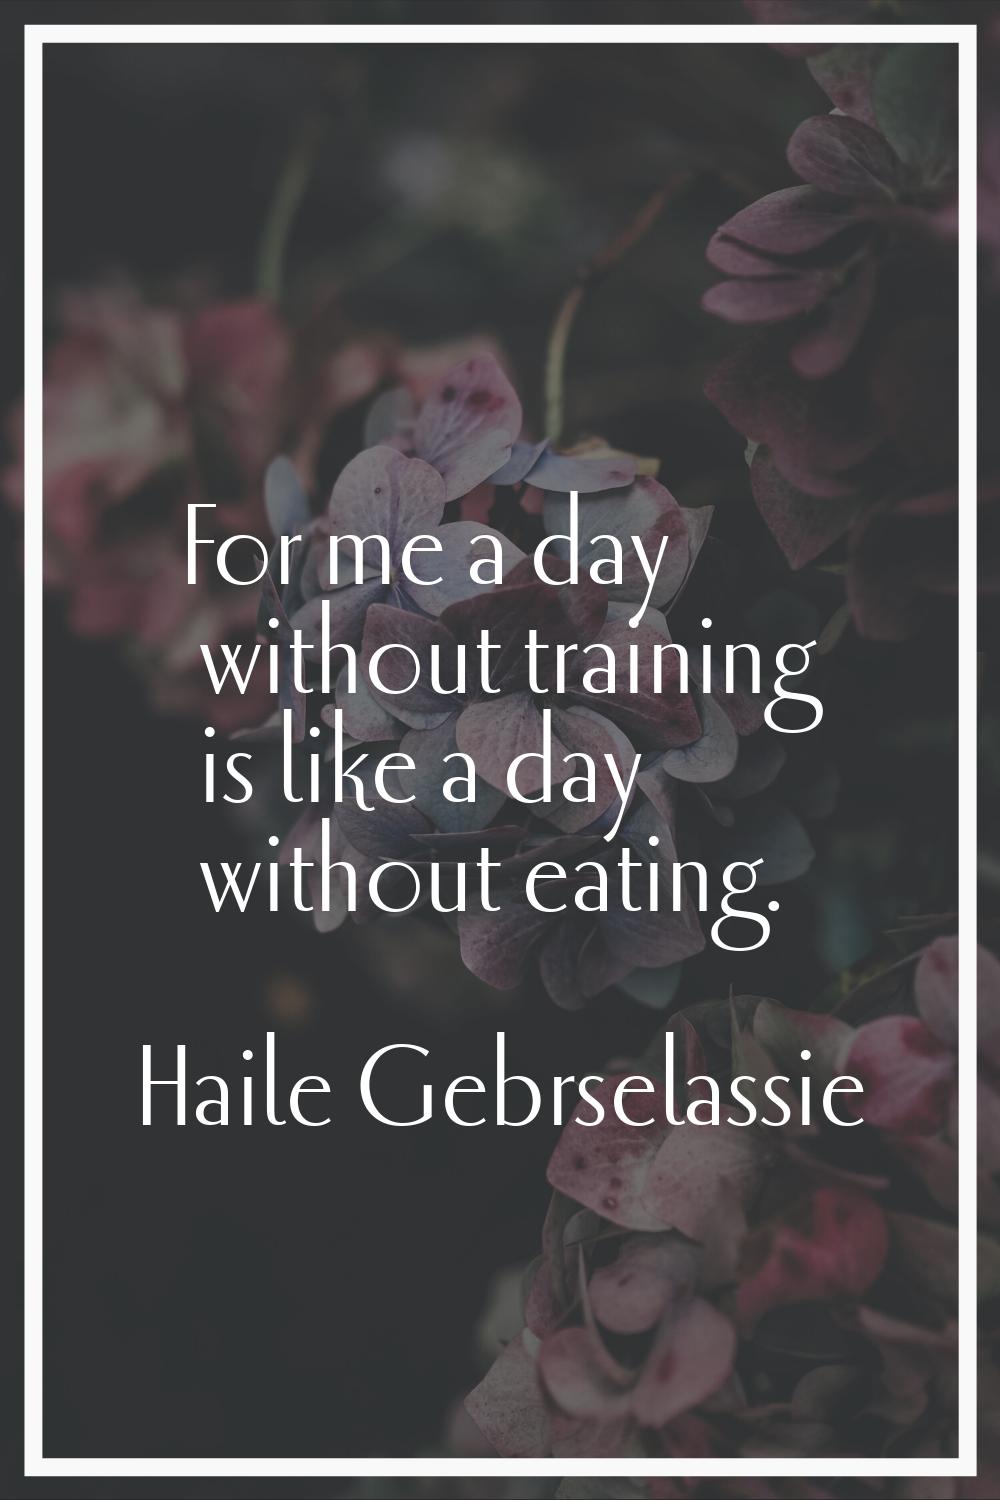 For me a day without training is like a day without eating.